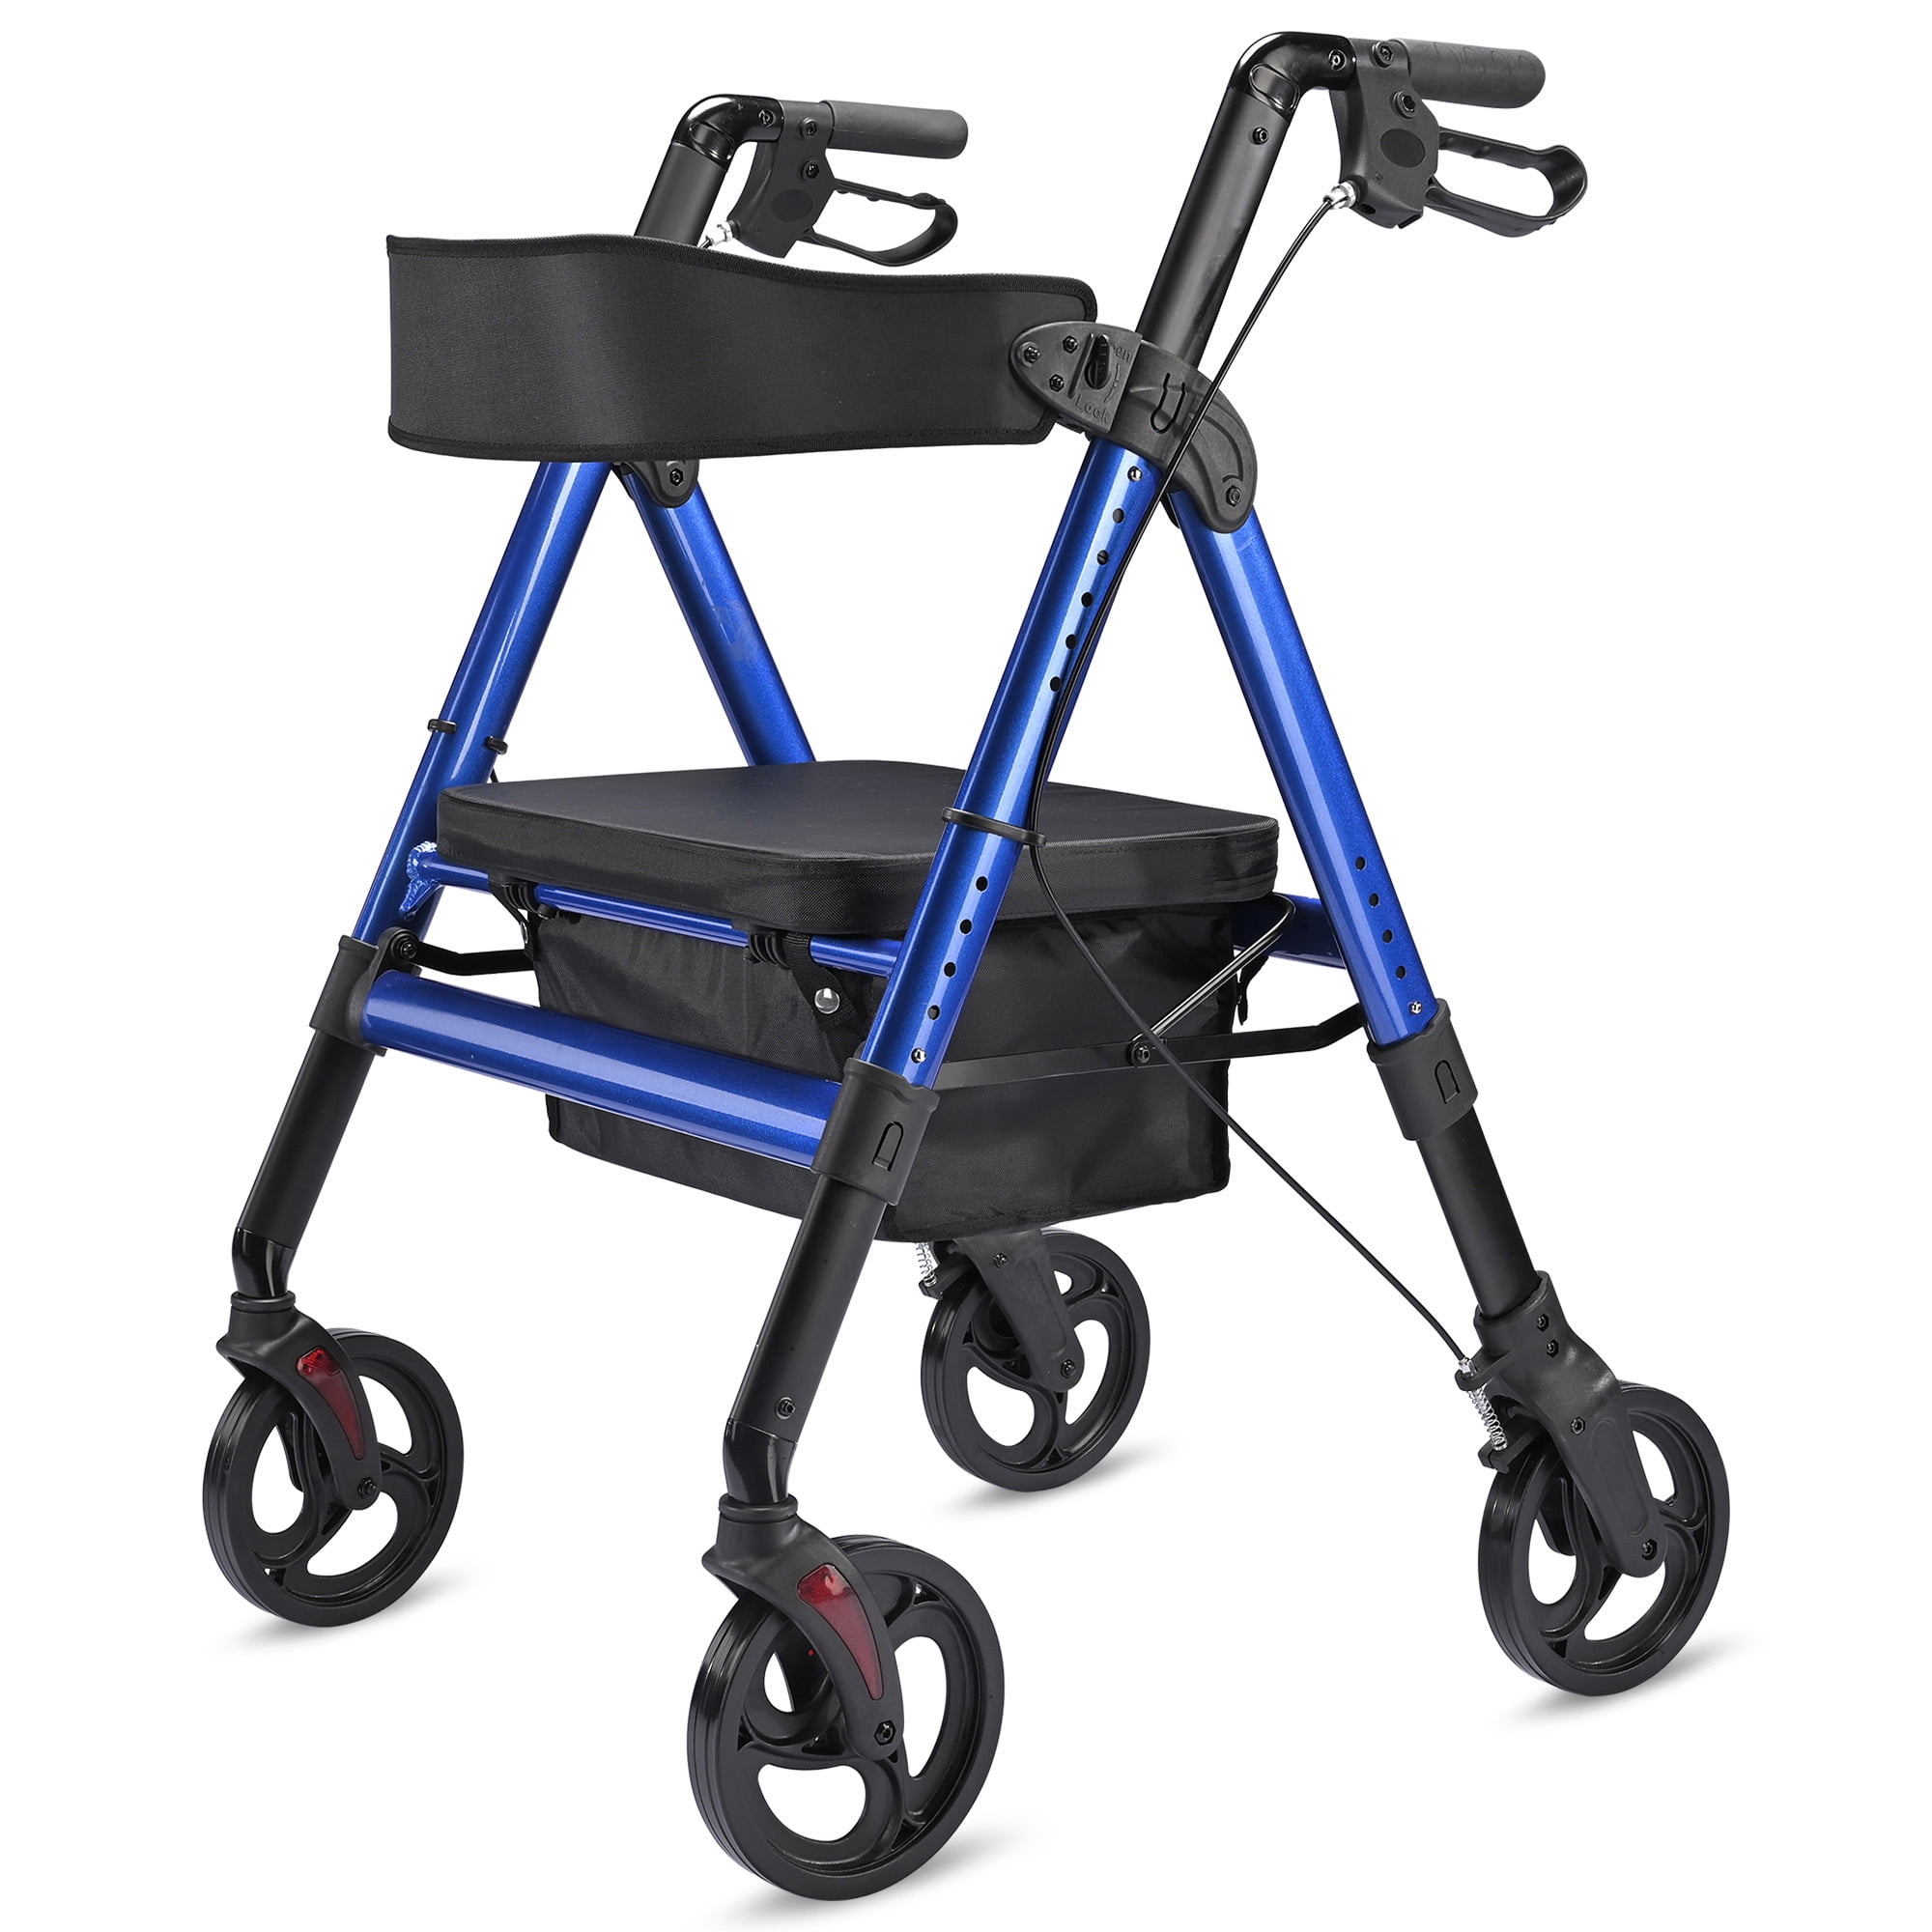 Lightweight Aluminum Rollator Walker with Padded Seat,5 Wheels,Large Capacity Shopping Basket Compact & Portable Design for Seniors and Adults 